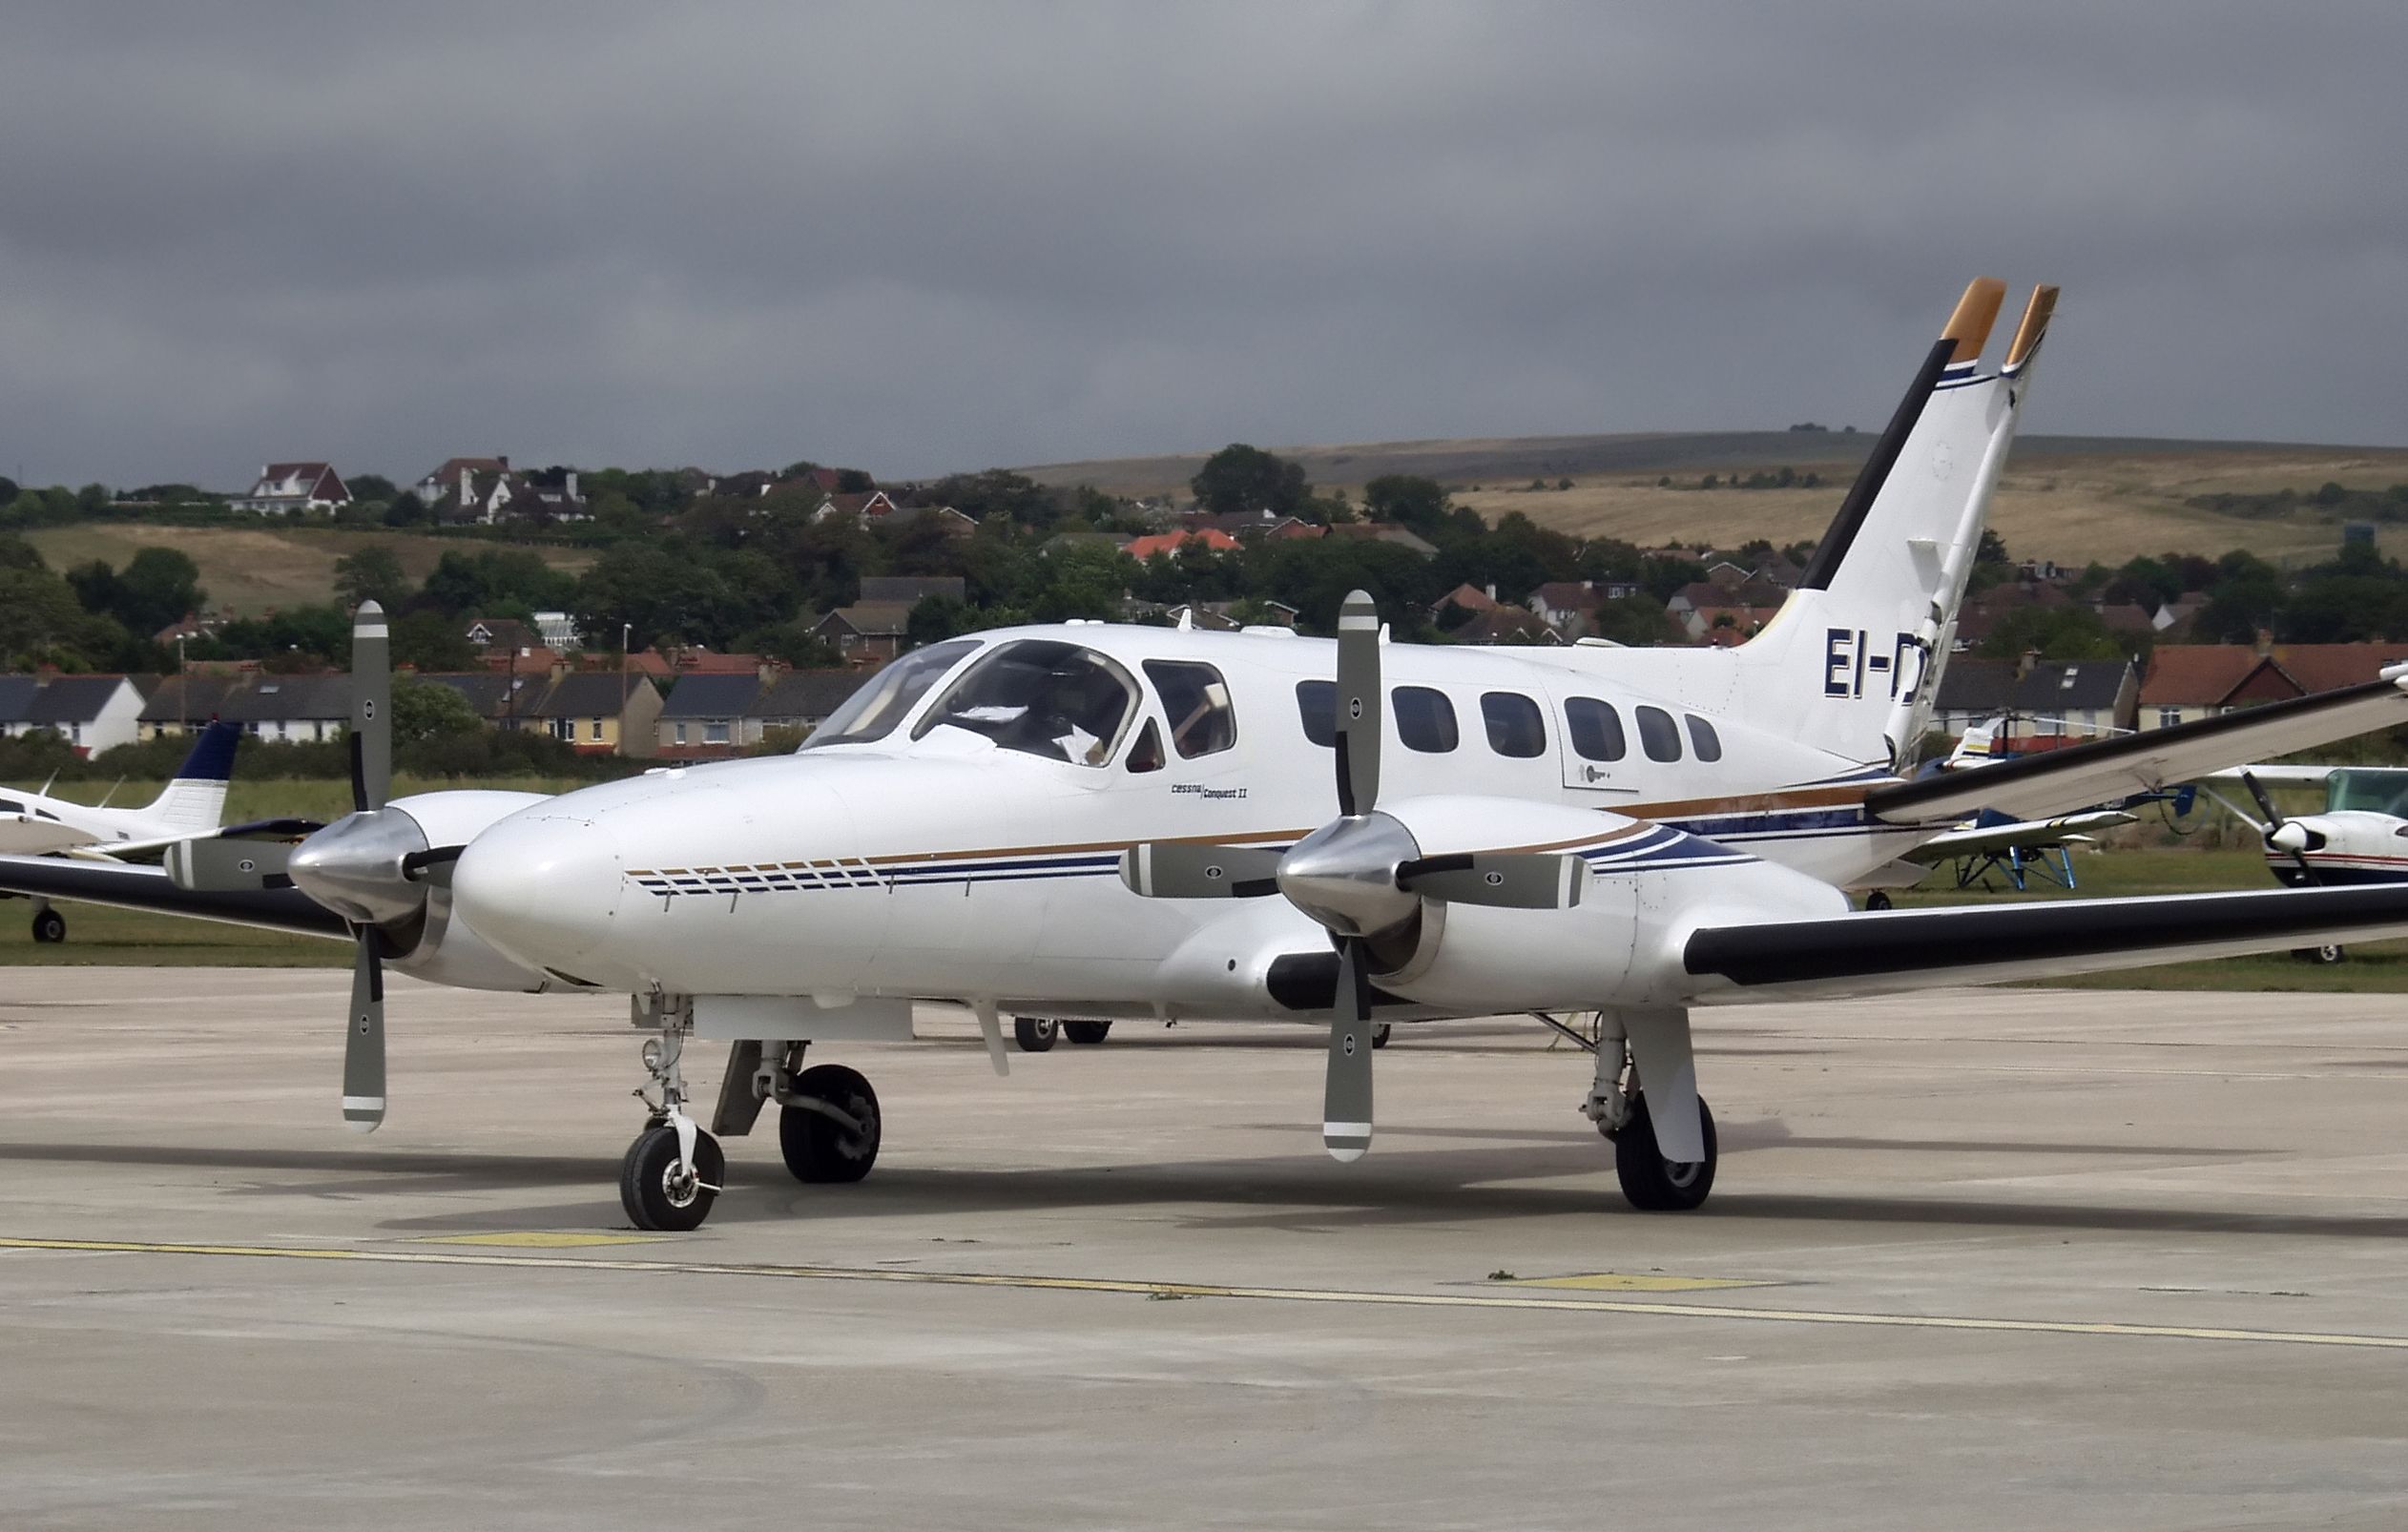 A Cessna 441 Conquest II on an airport apron.